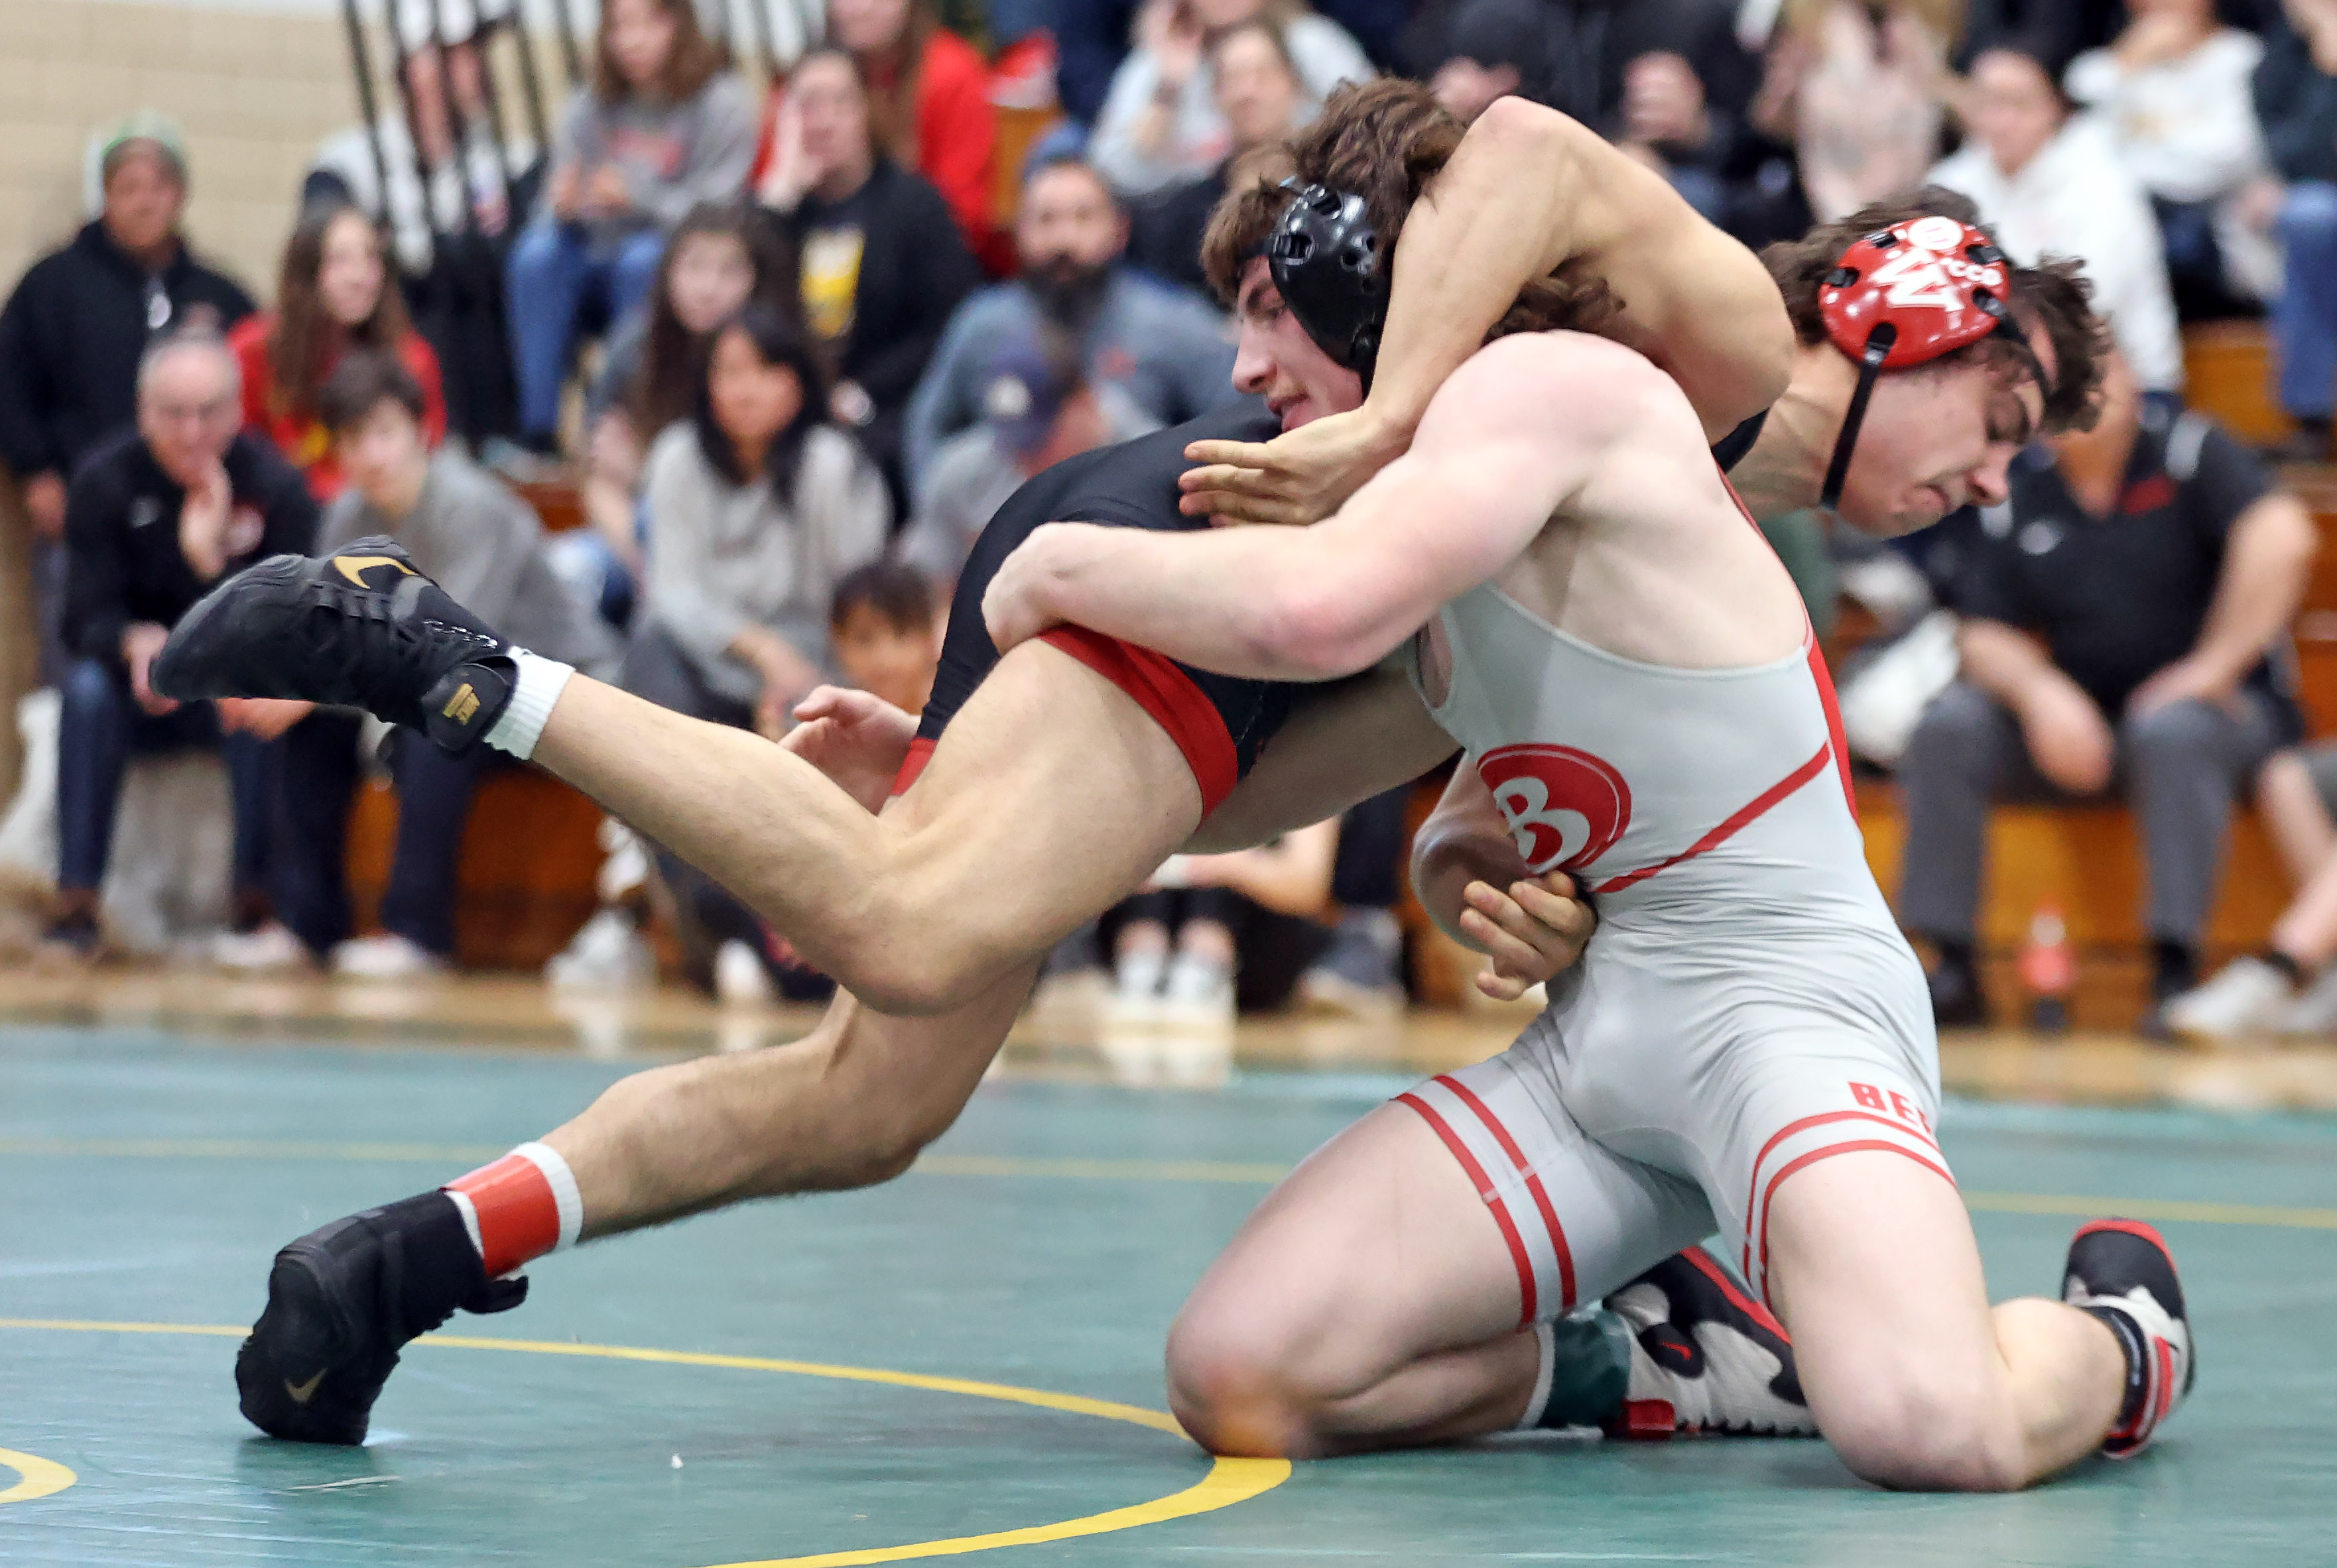 OHSWCA Dual Meet State Championships Division I, February 12, 2022